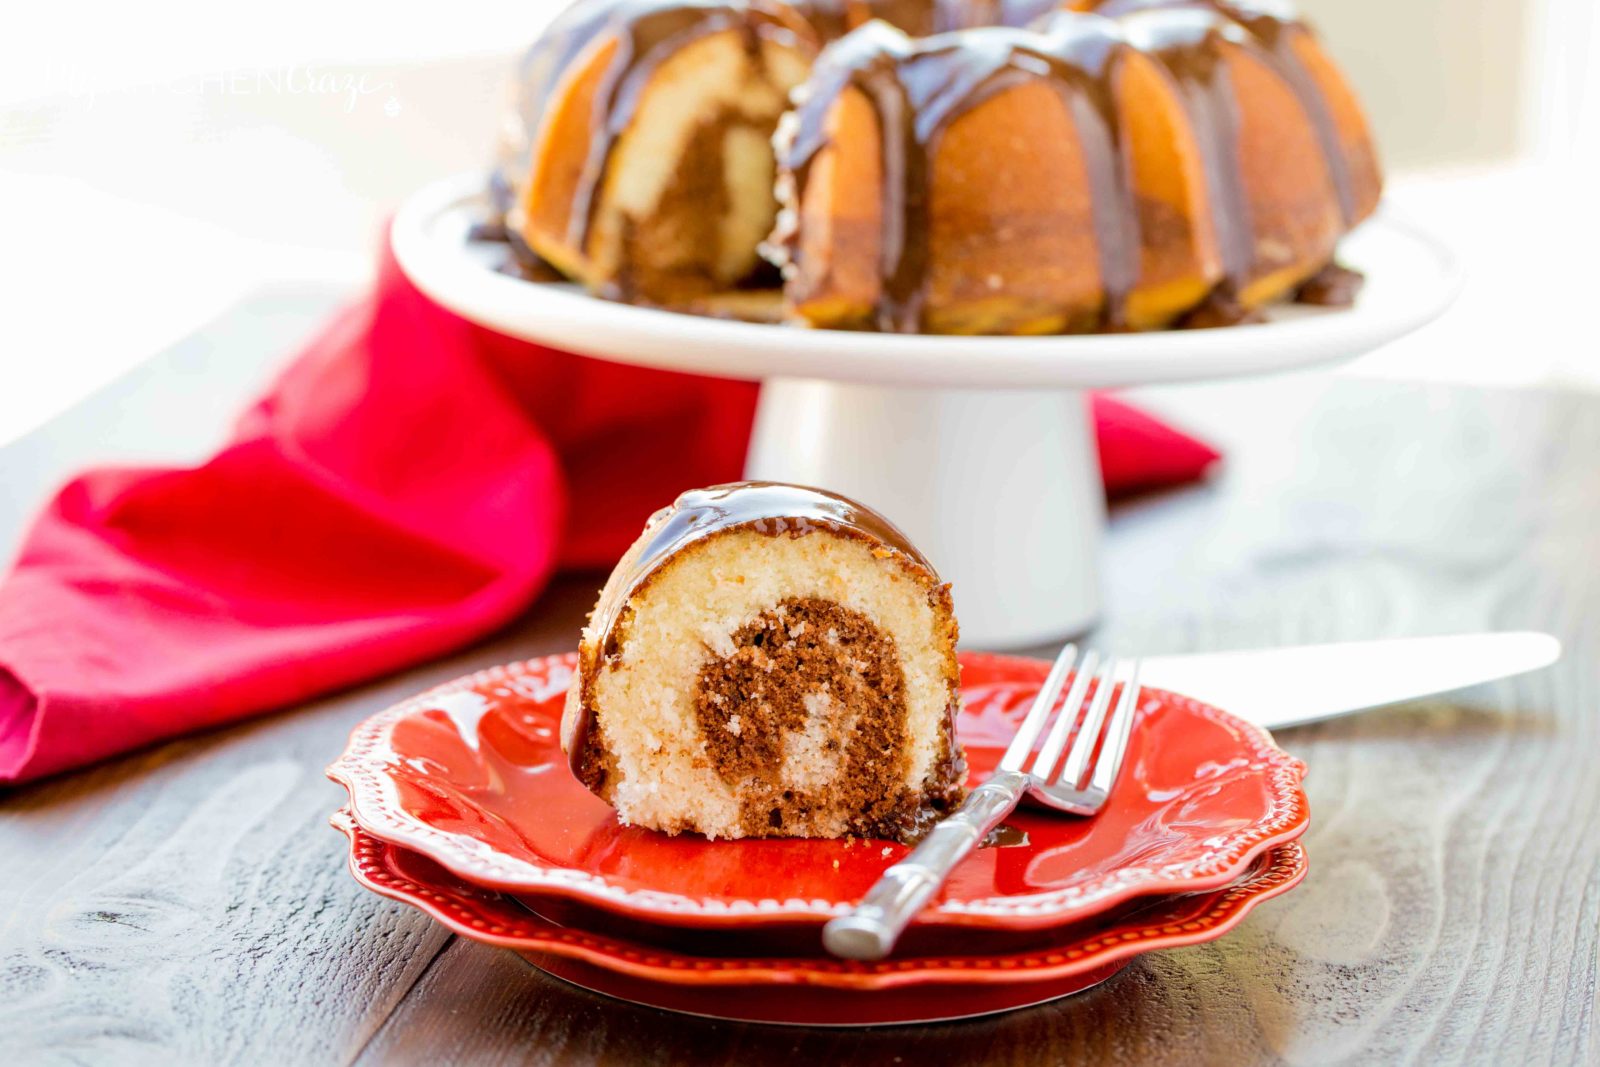 Marble Bundt Cake ~ mykitchencraze.com ~ Super easy marble bundt cake, topped with luscious chocolate ganache. This is one cake you'll want to make!